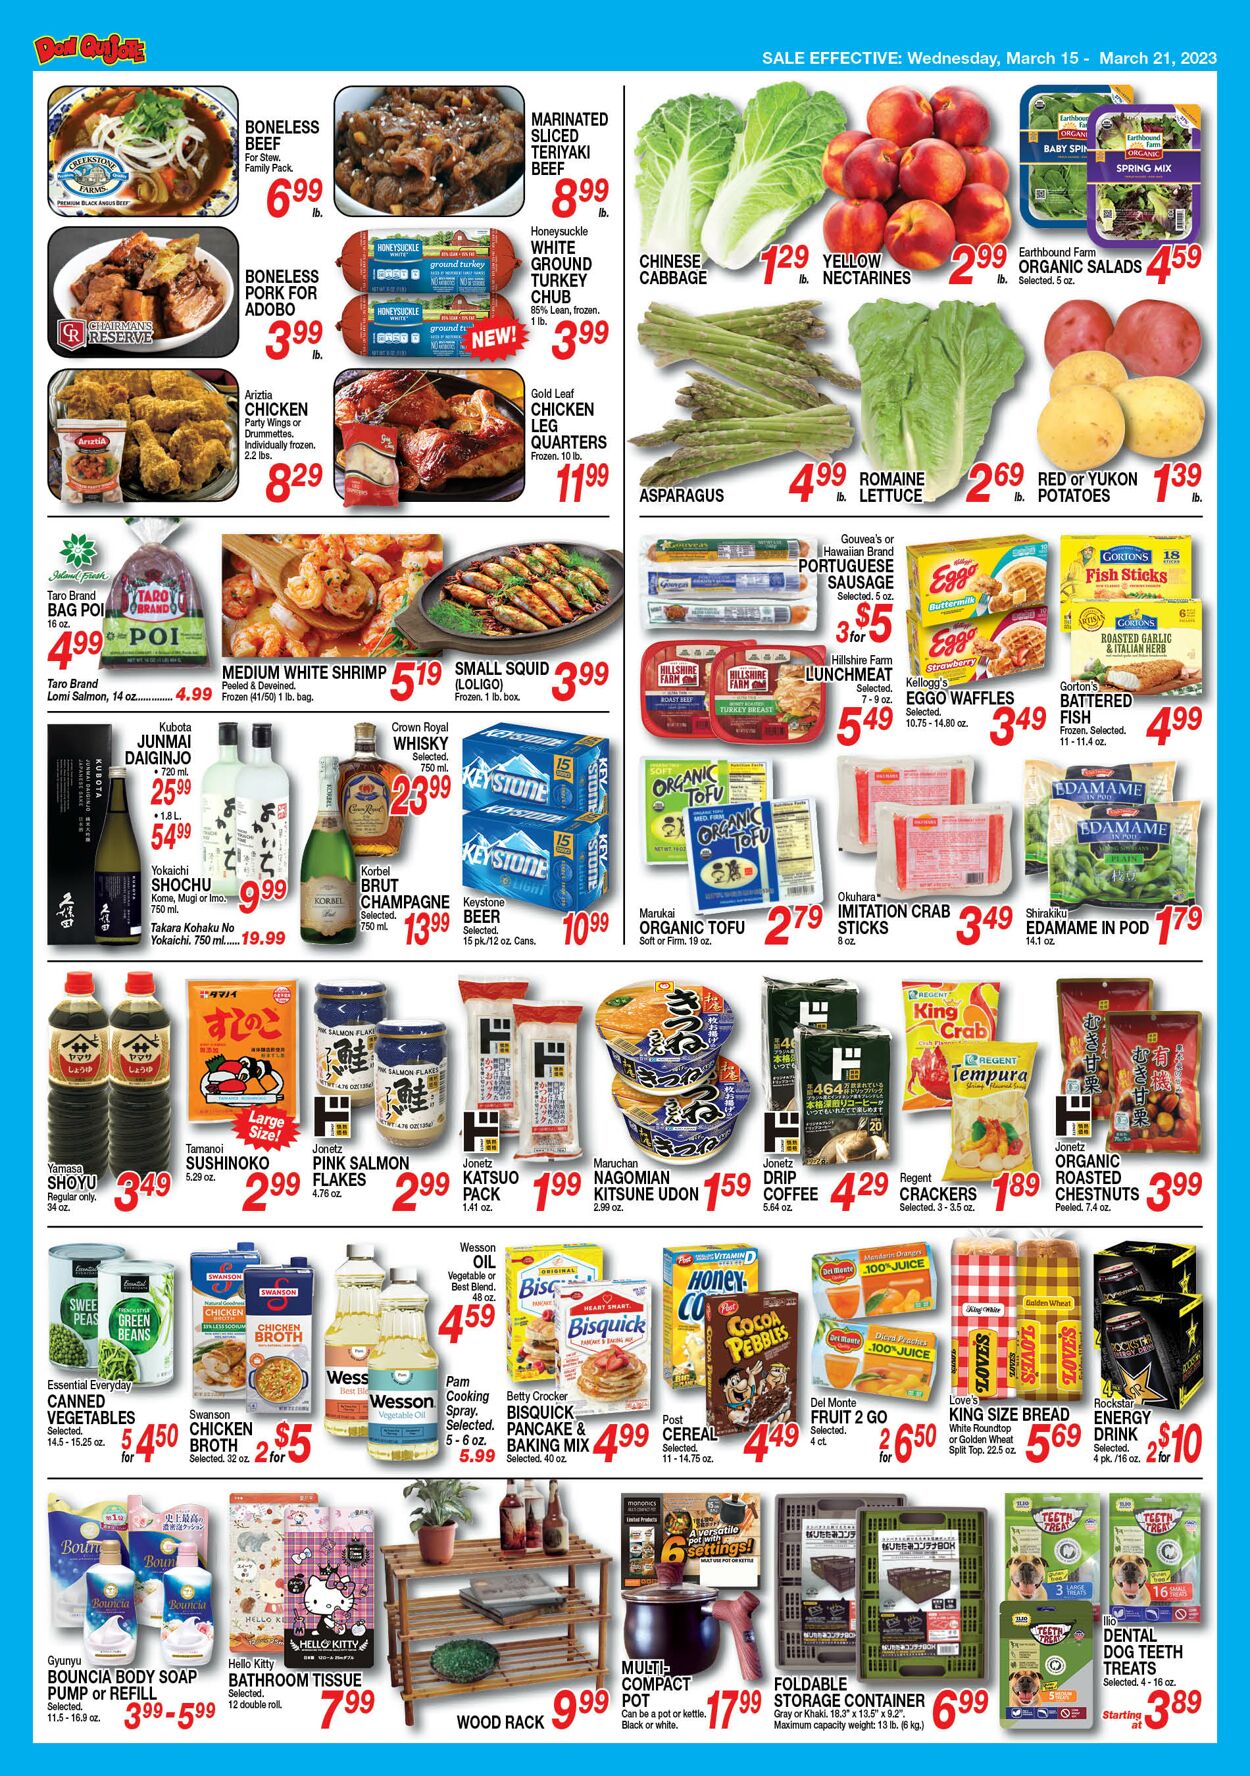 Catalogue Don Quijote Hawaii from 03/15/2023